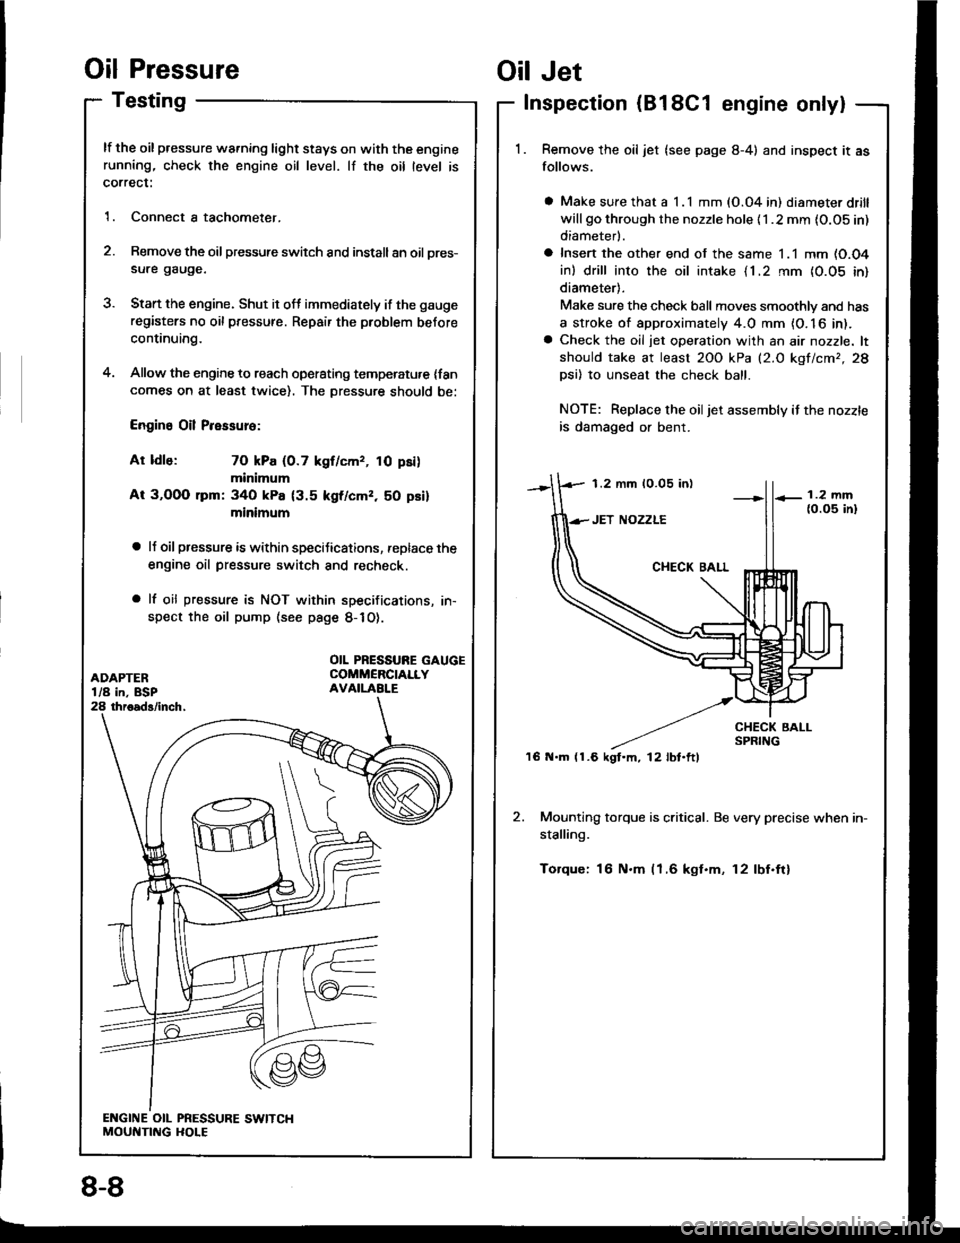 HONDA INTEGRA 1994 4.G Workshop Manual Oil Pressure
Testing
lf the oil pressure warning light stays on with the enginerunning, check the engine oil level. lf the oil level is
correct:
1. Connect a tachometer.
2. Remove the oil pressure swi